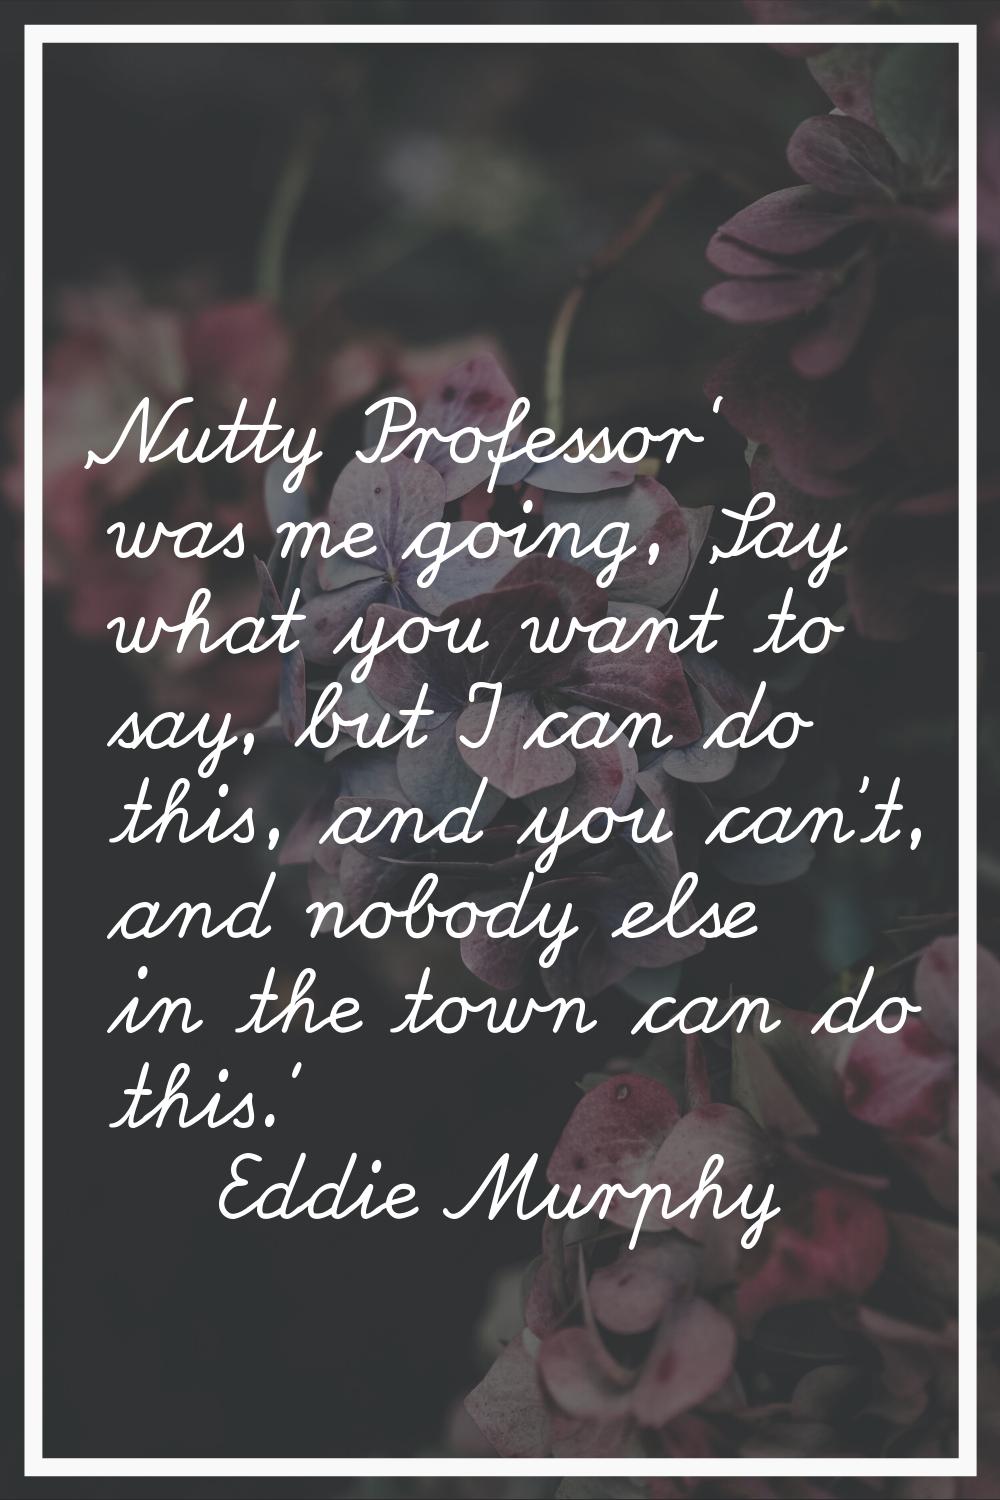 'Nutty Professor' was me going, 'Say what you want to say, but I can do this, and you can't, and no